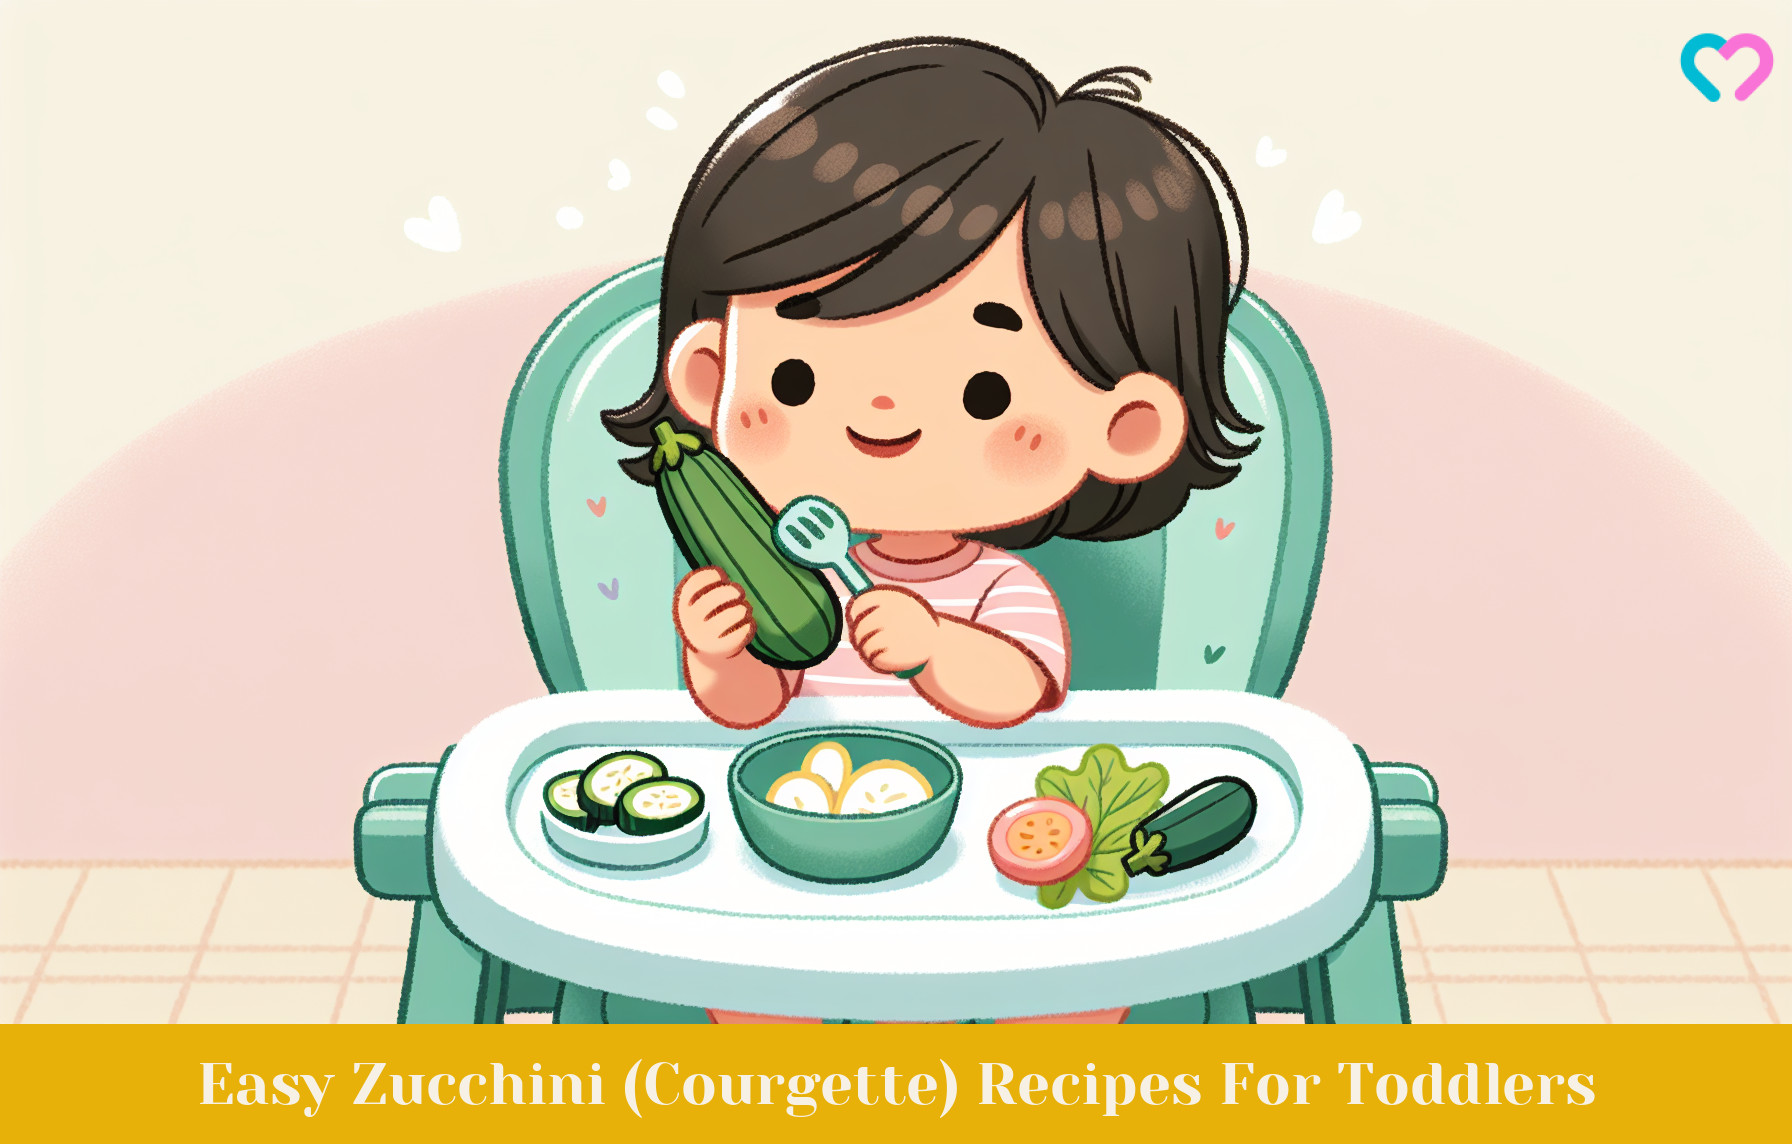 Zucchini Recipes For Toddlers_illustration